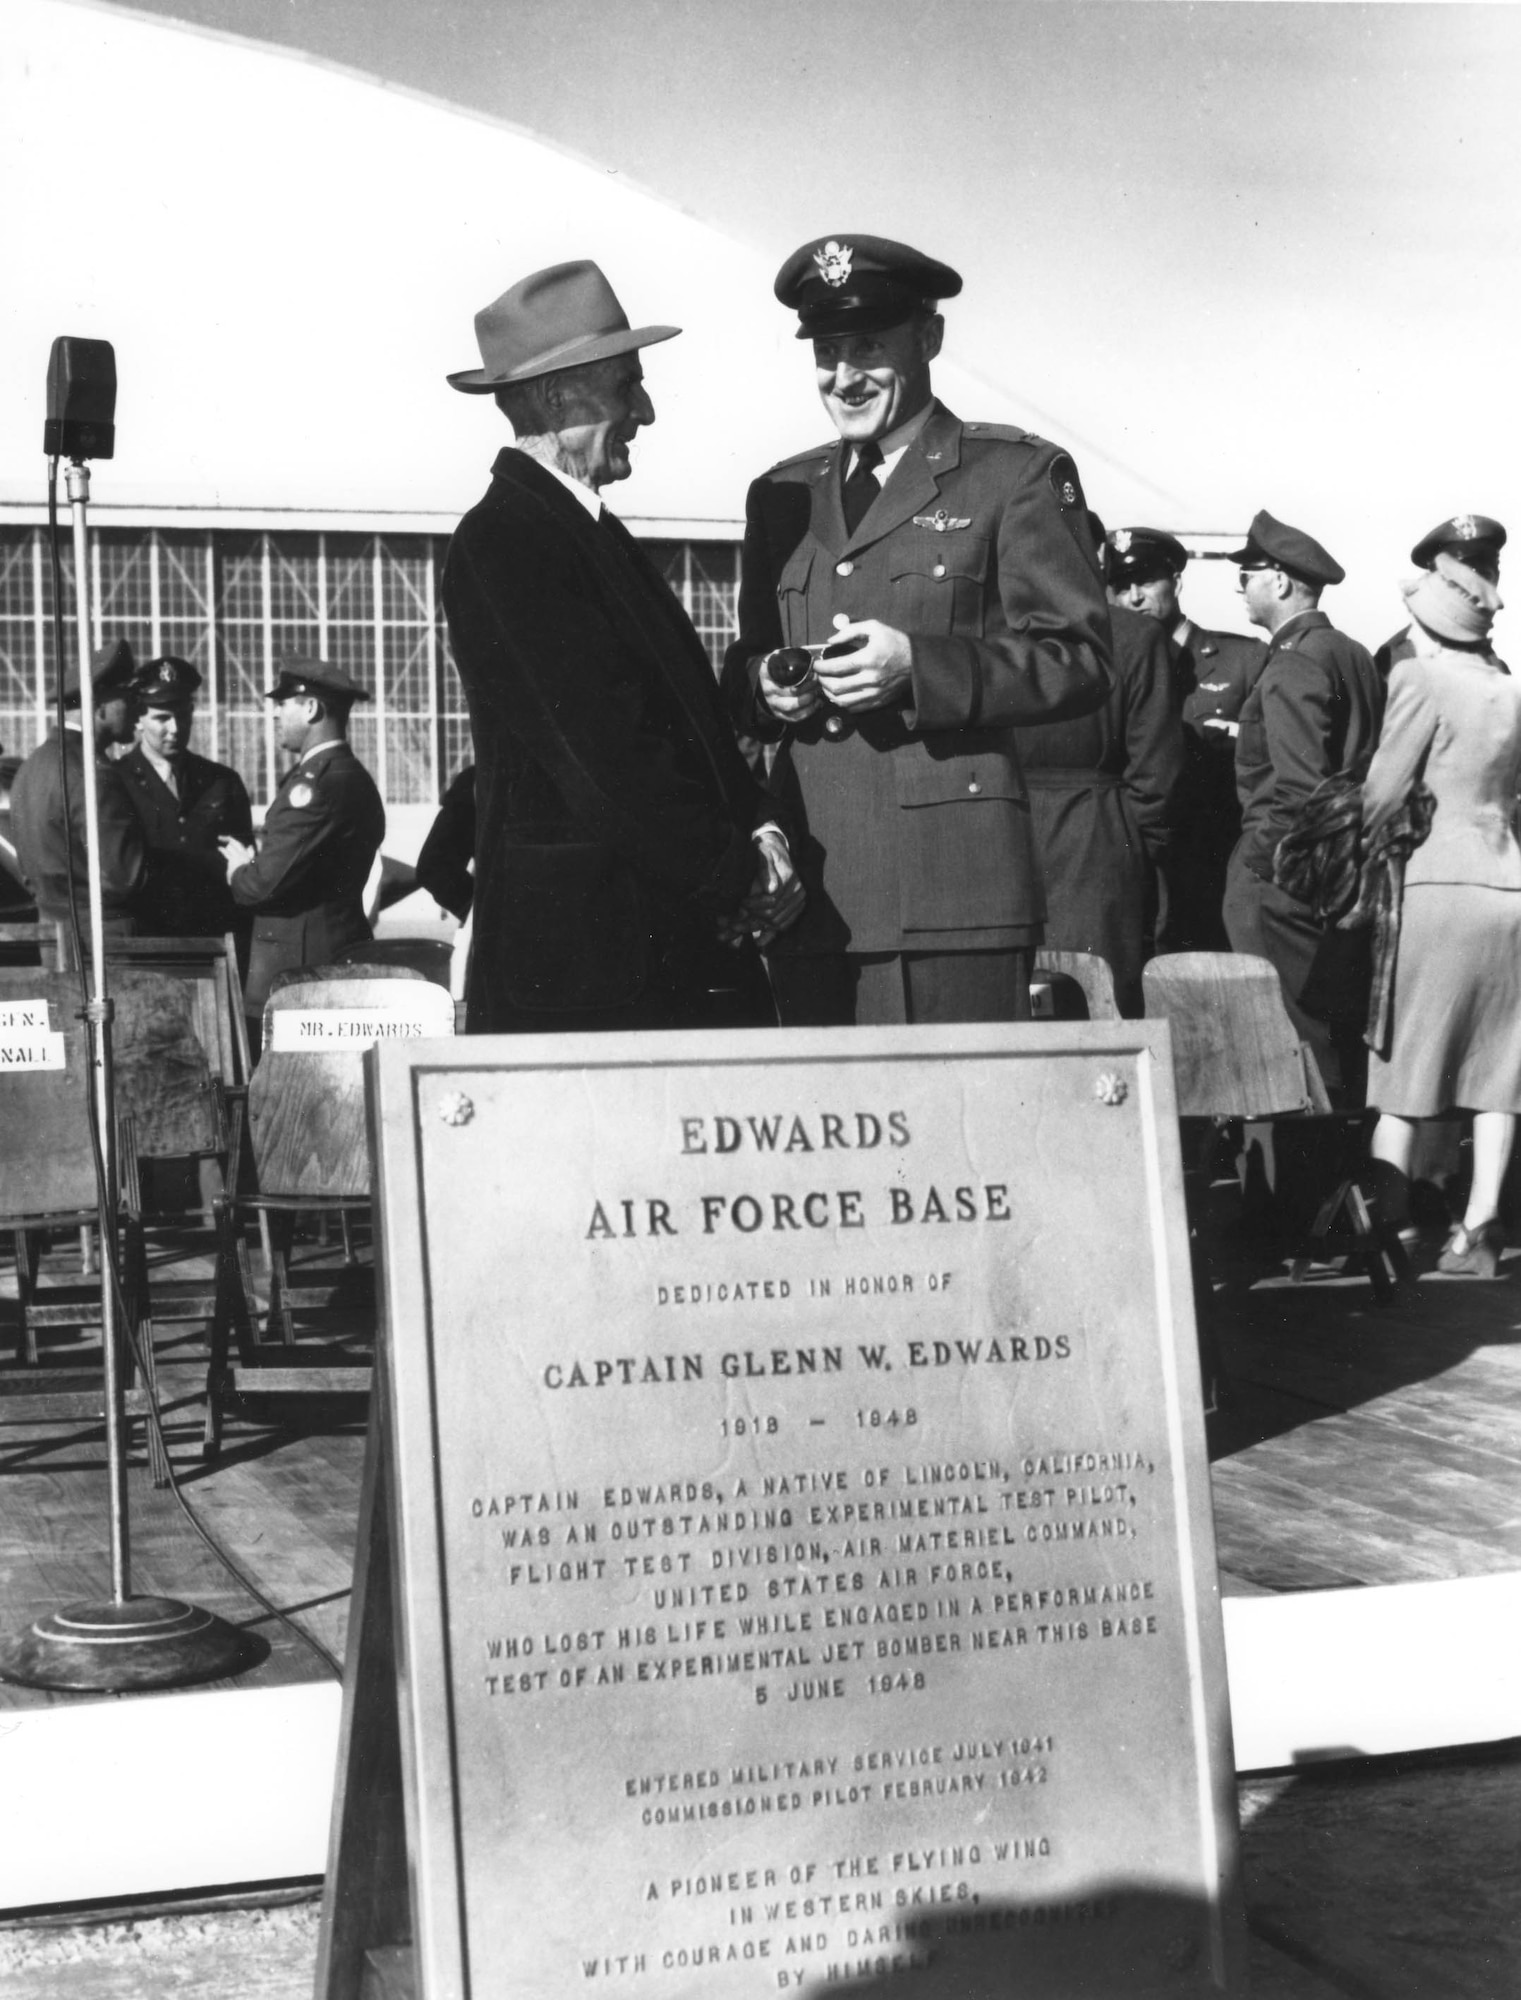 On January 27, 1950 a ceremony was held in connection with Armed Forces Day to rename the base in honor of Capt. Glen W. Edwards, a crewmember killed in the  YB-49 flying wing crash the previous year.  The plaque unveiled that day, misspelled his first name as Glenn, and was later corrected.  The base of the plaque reads “A pioneer of the Flying Wing in the western skies, with courage and daring unrecognized by himself.” (Courtesy Photo) 